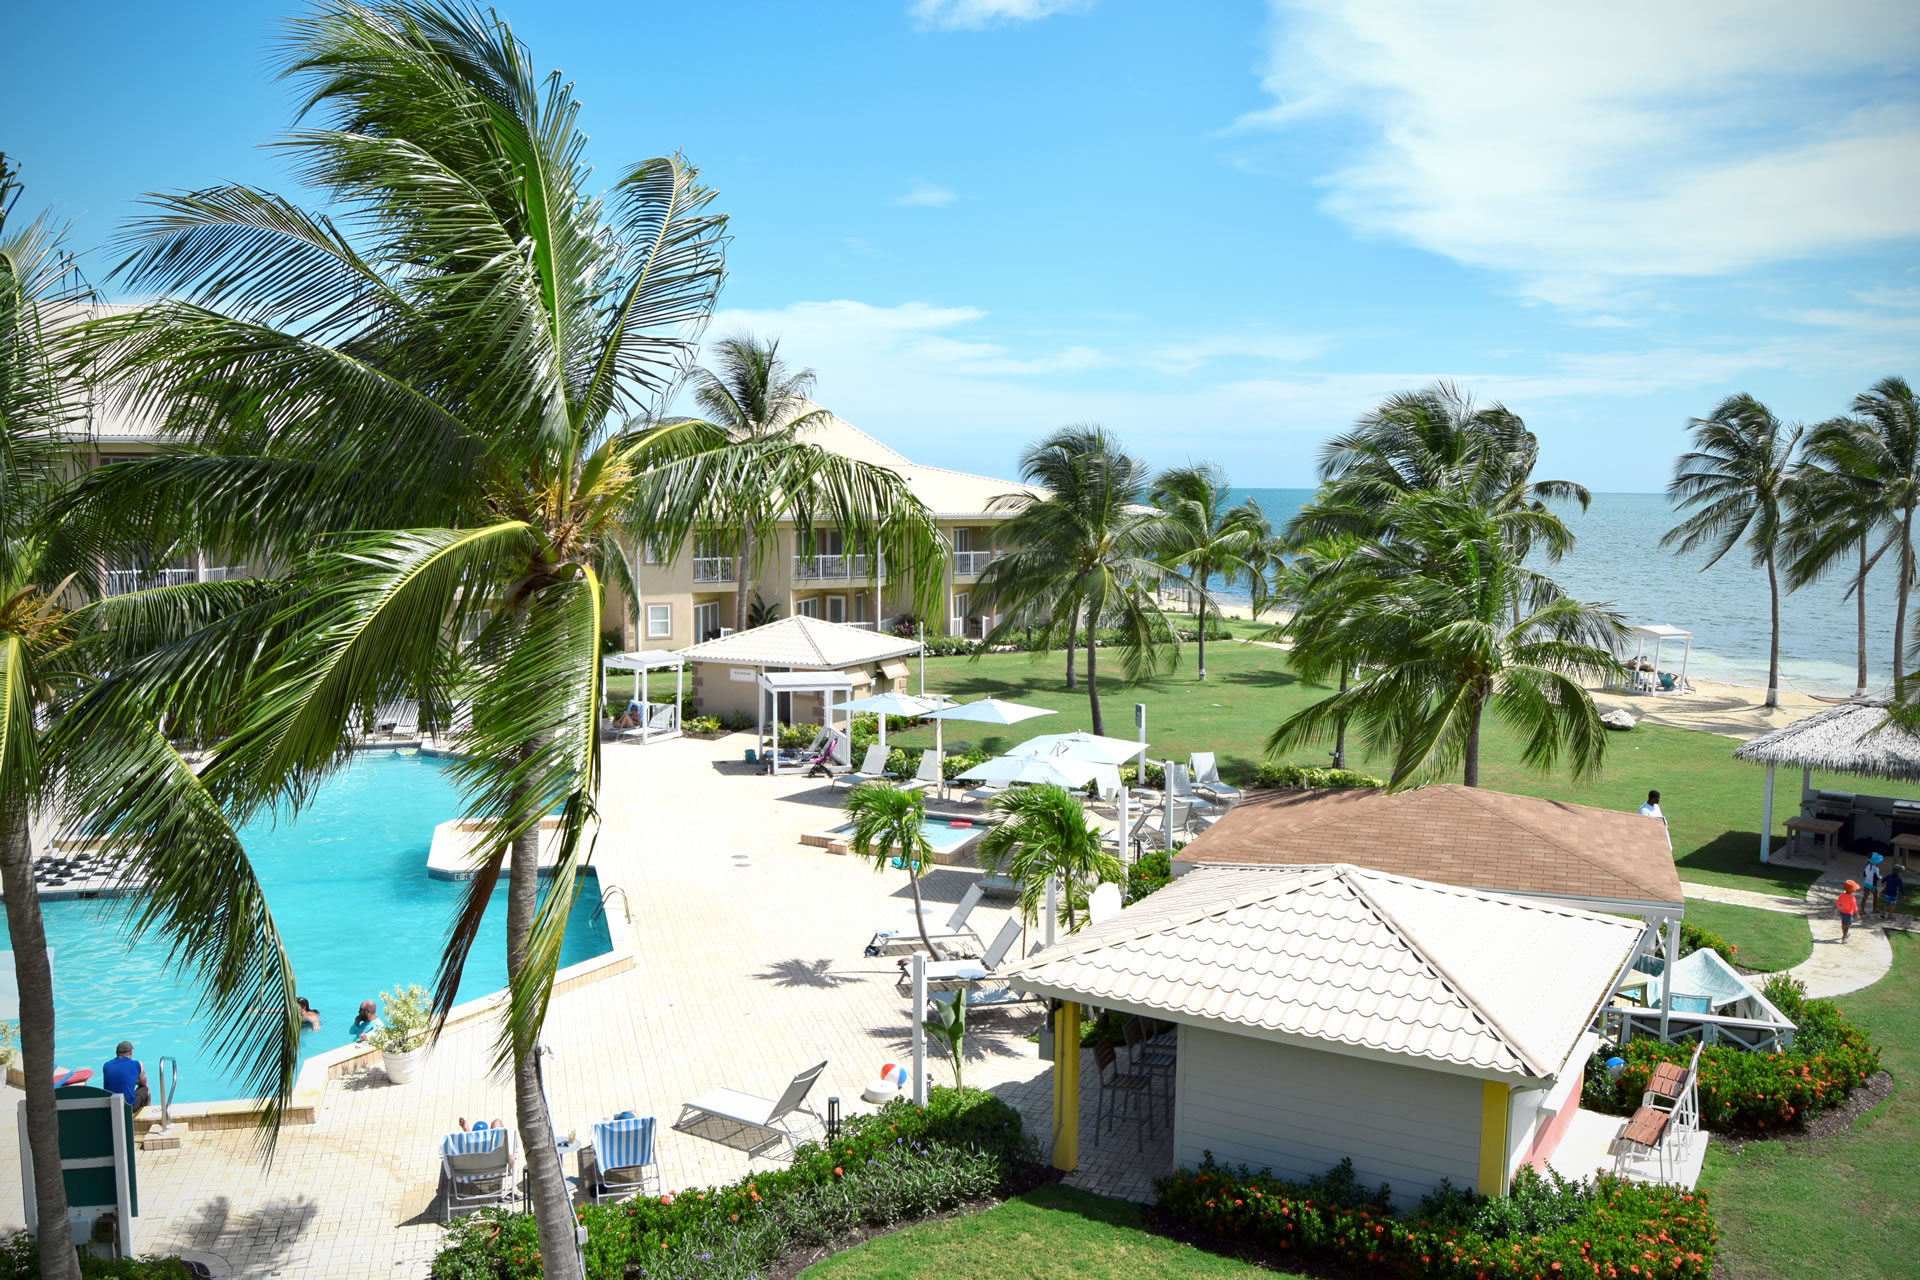 The Grand Caymanian Resort pool and beach area.